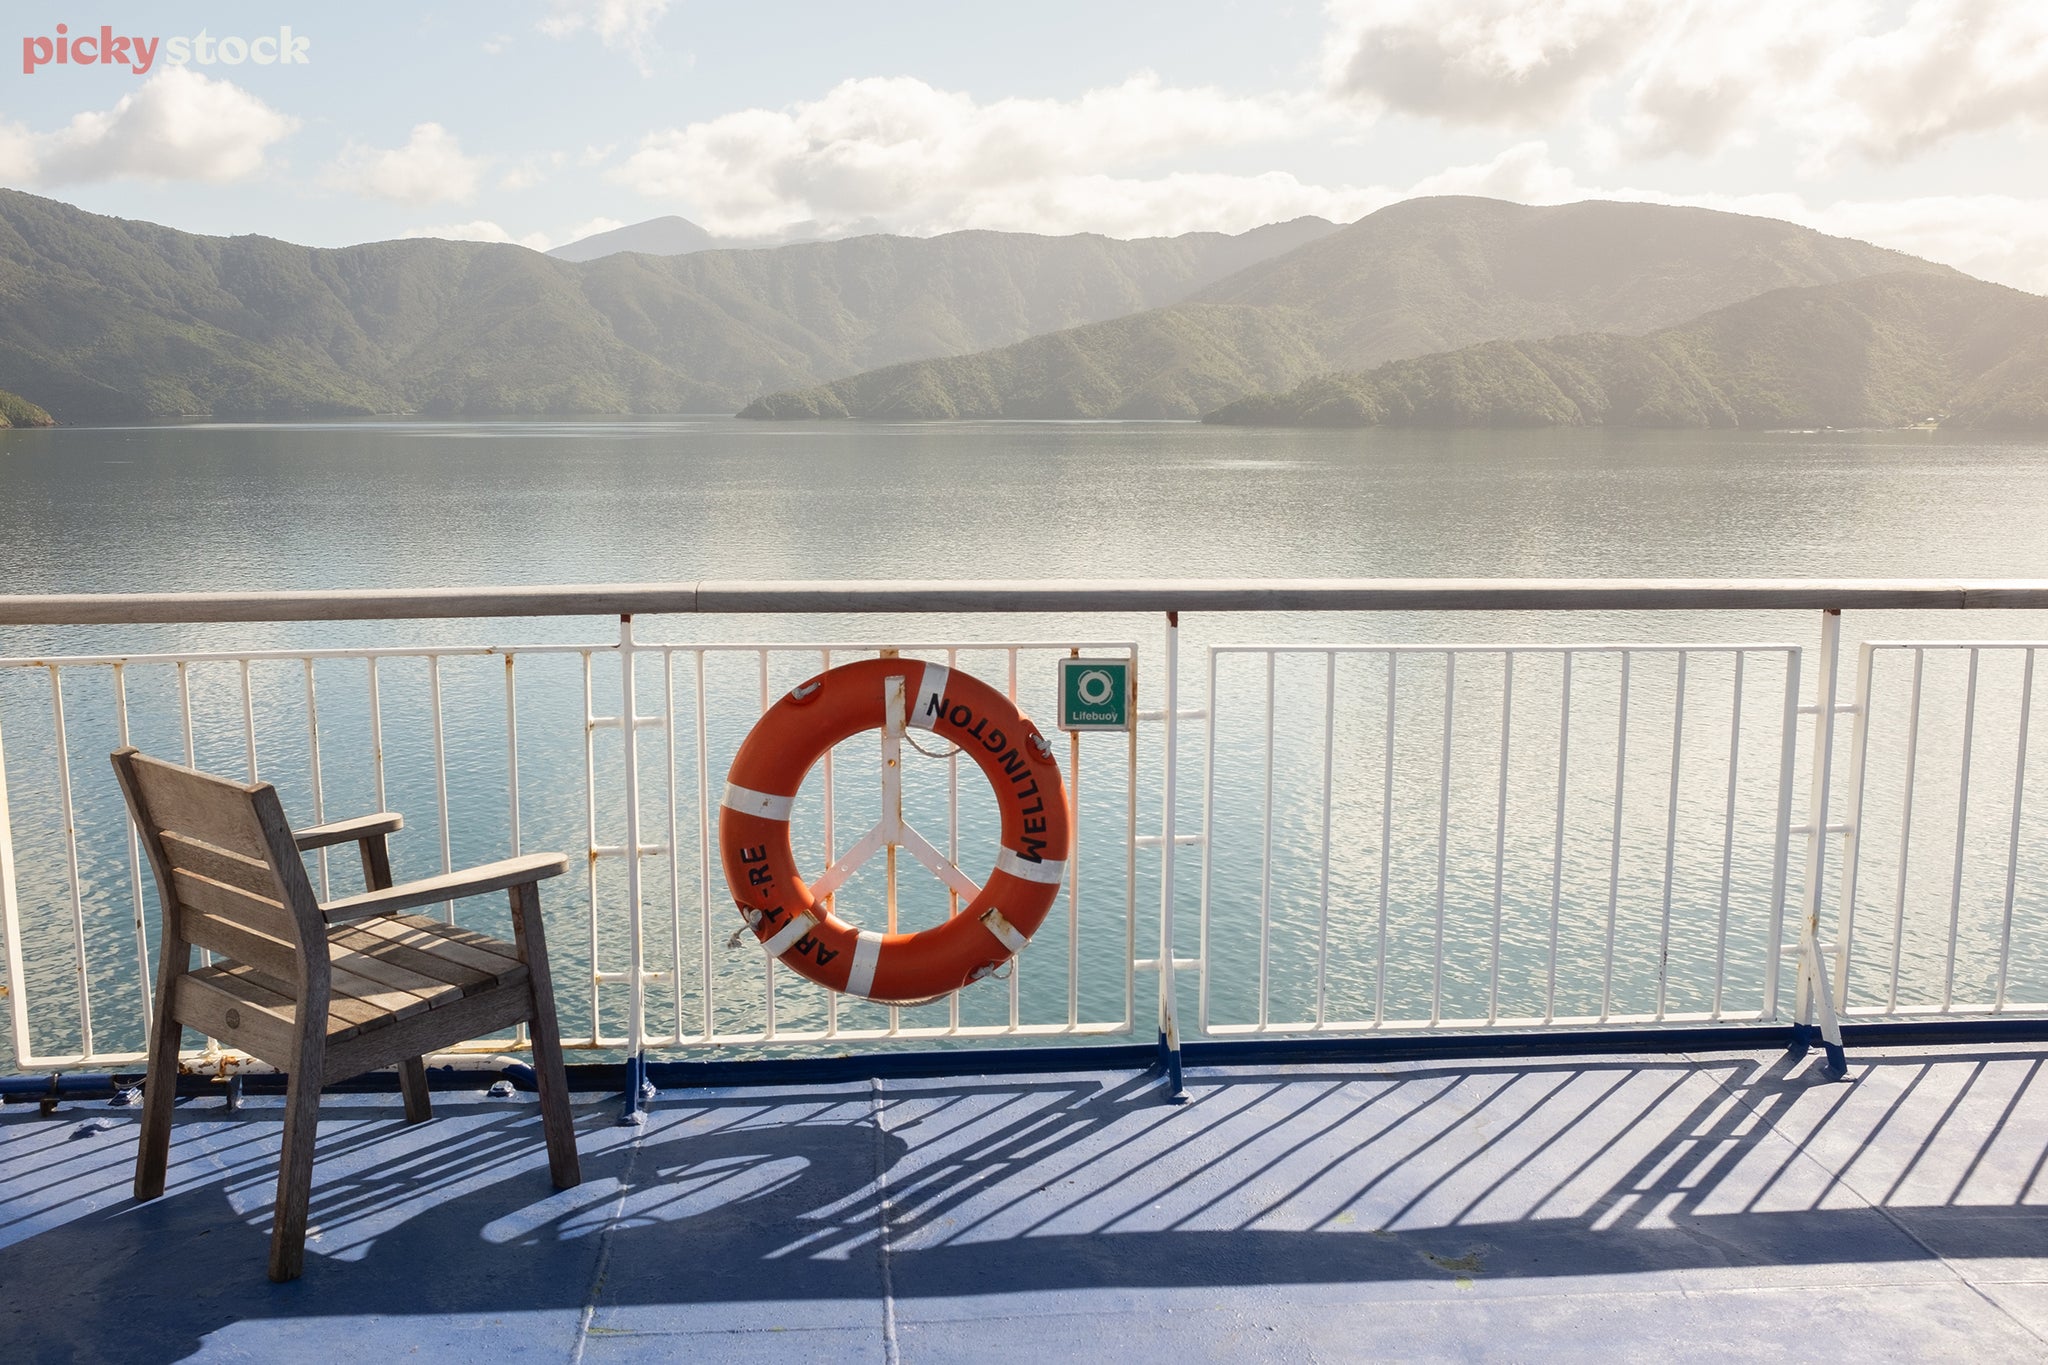 Landscape of close of a lifebuoy and small wooden chair behind a white metal handrail aboard a blue ship deck. The ship cruises past bays of green hills under clear skys.